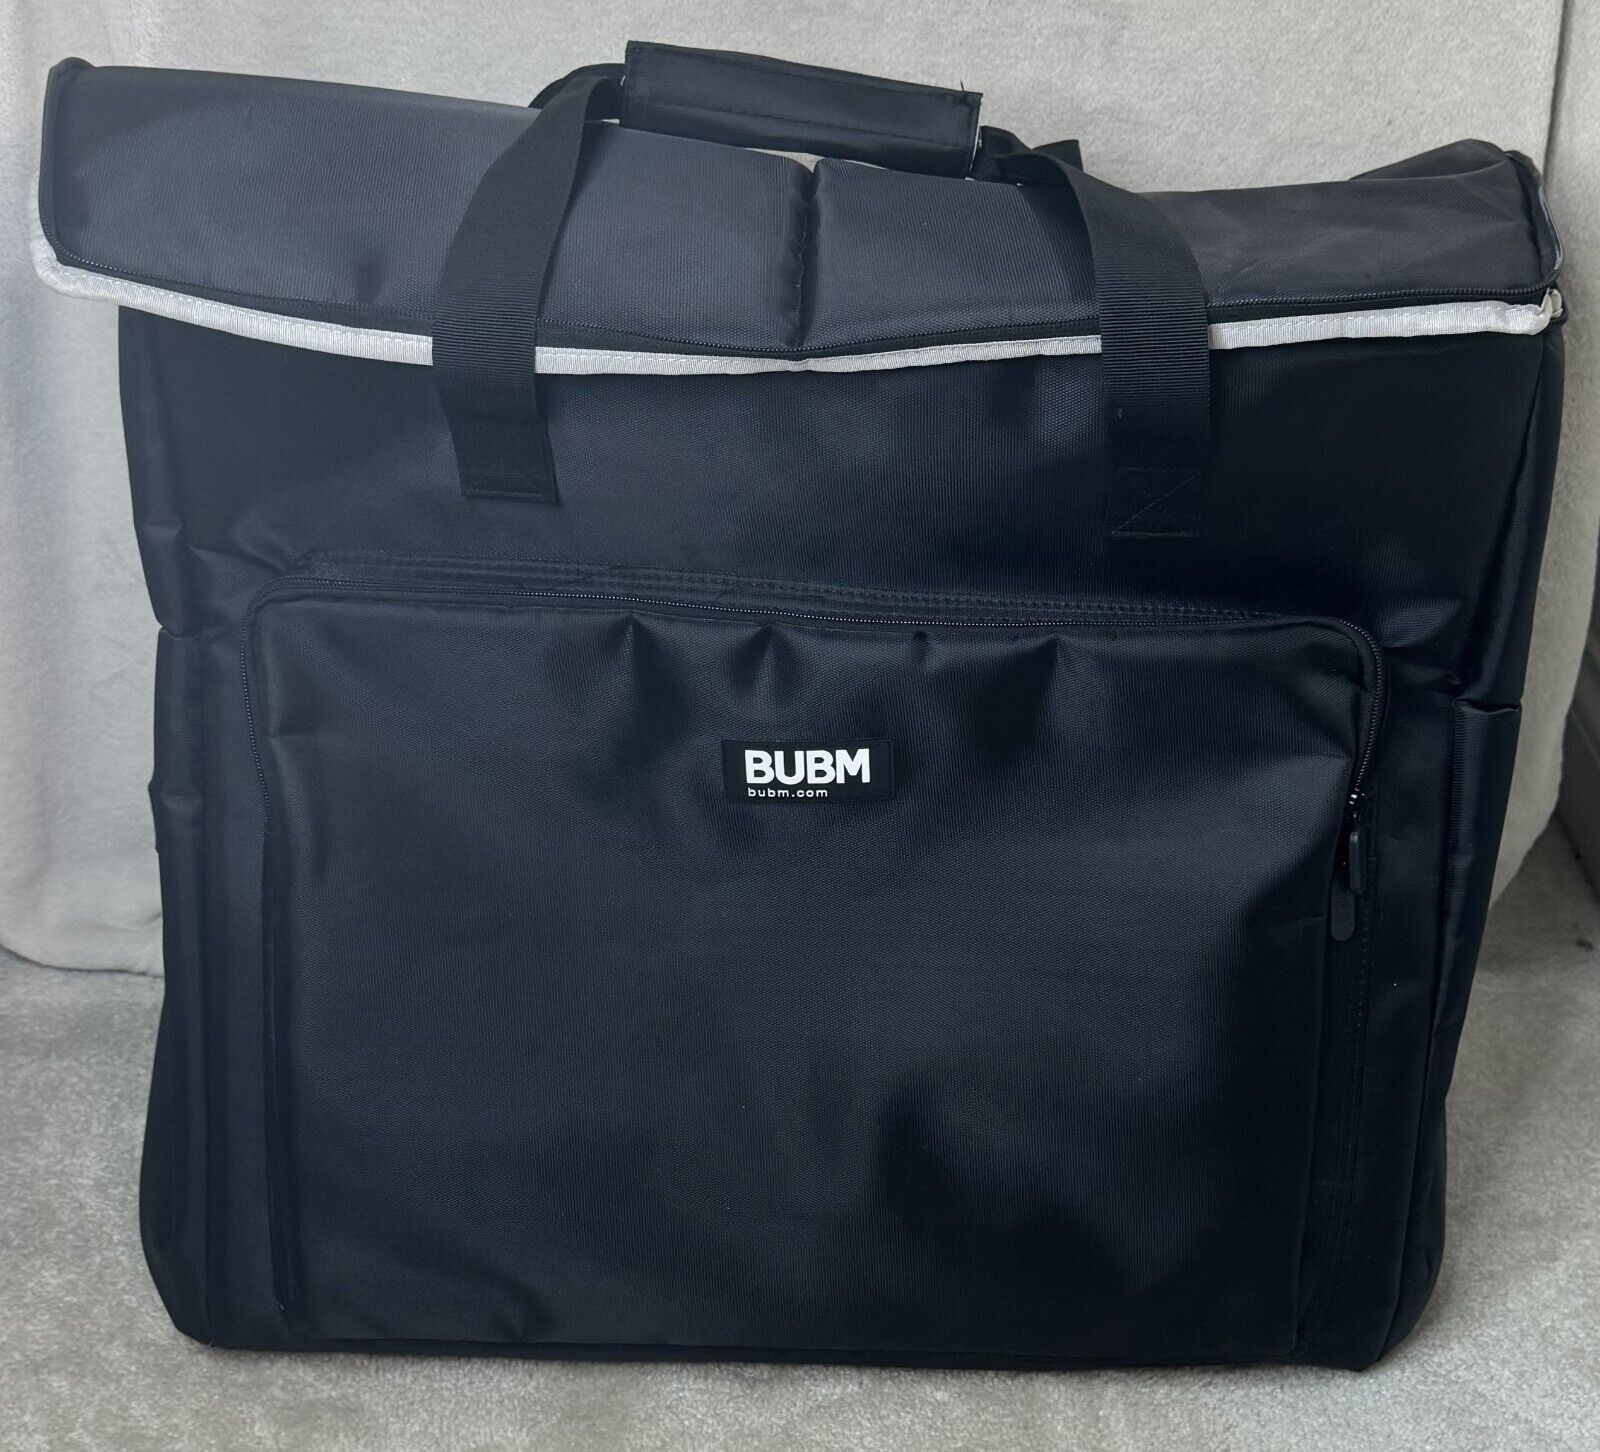 BUBM Desktop Computer Carrying Case, Padded Nylon Carry Tote Bag with Wheels